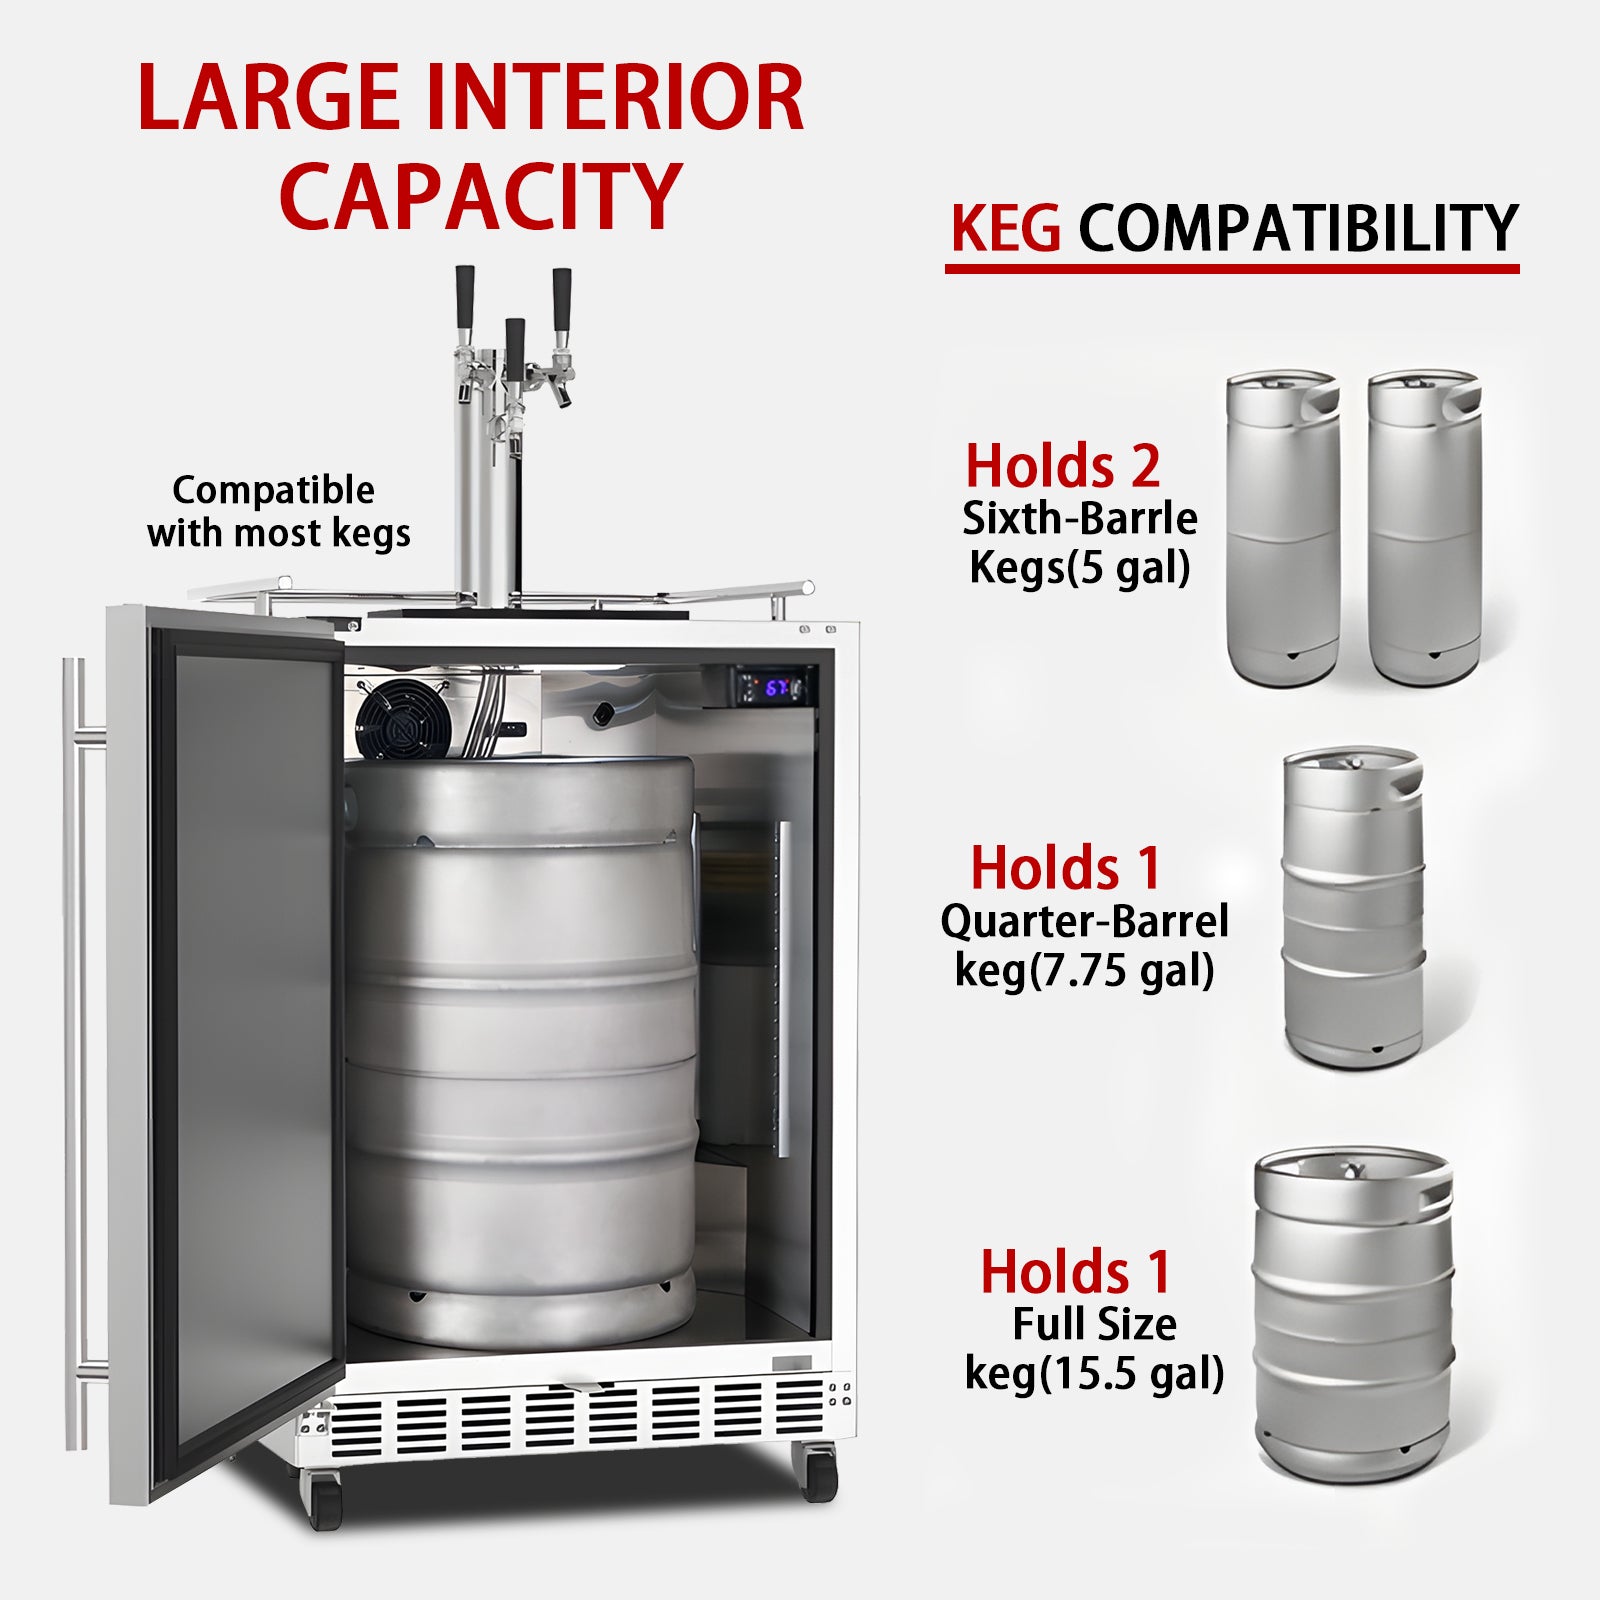 Side view of a 6.04 Cu Ft Undercounter Outdoor Refrigerator Kegerator with accompanying elements and description lines highlighting its keg compatibility